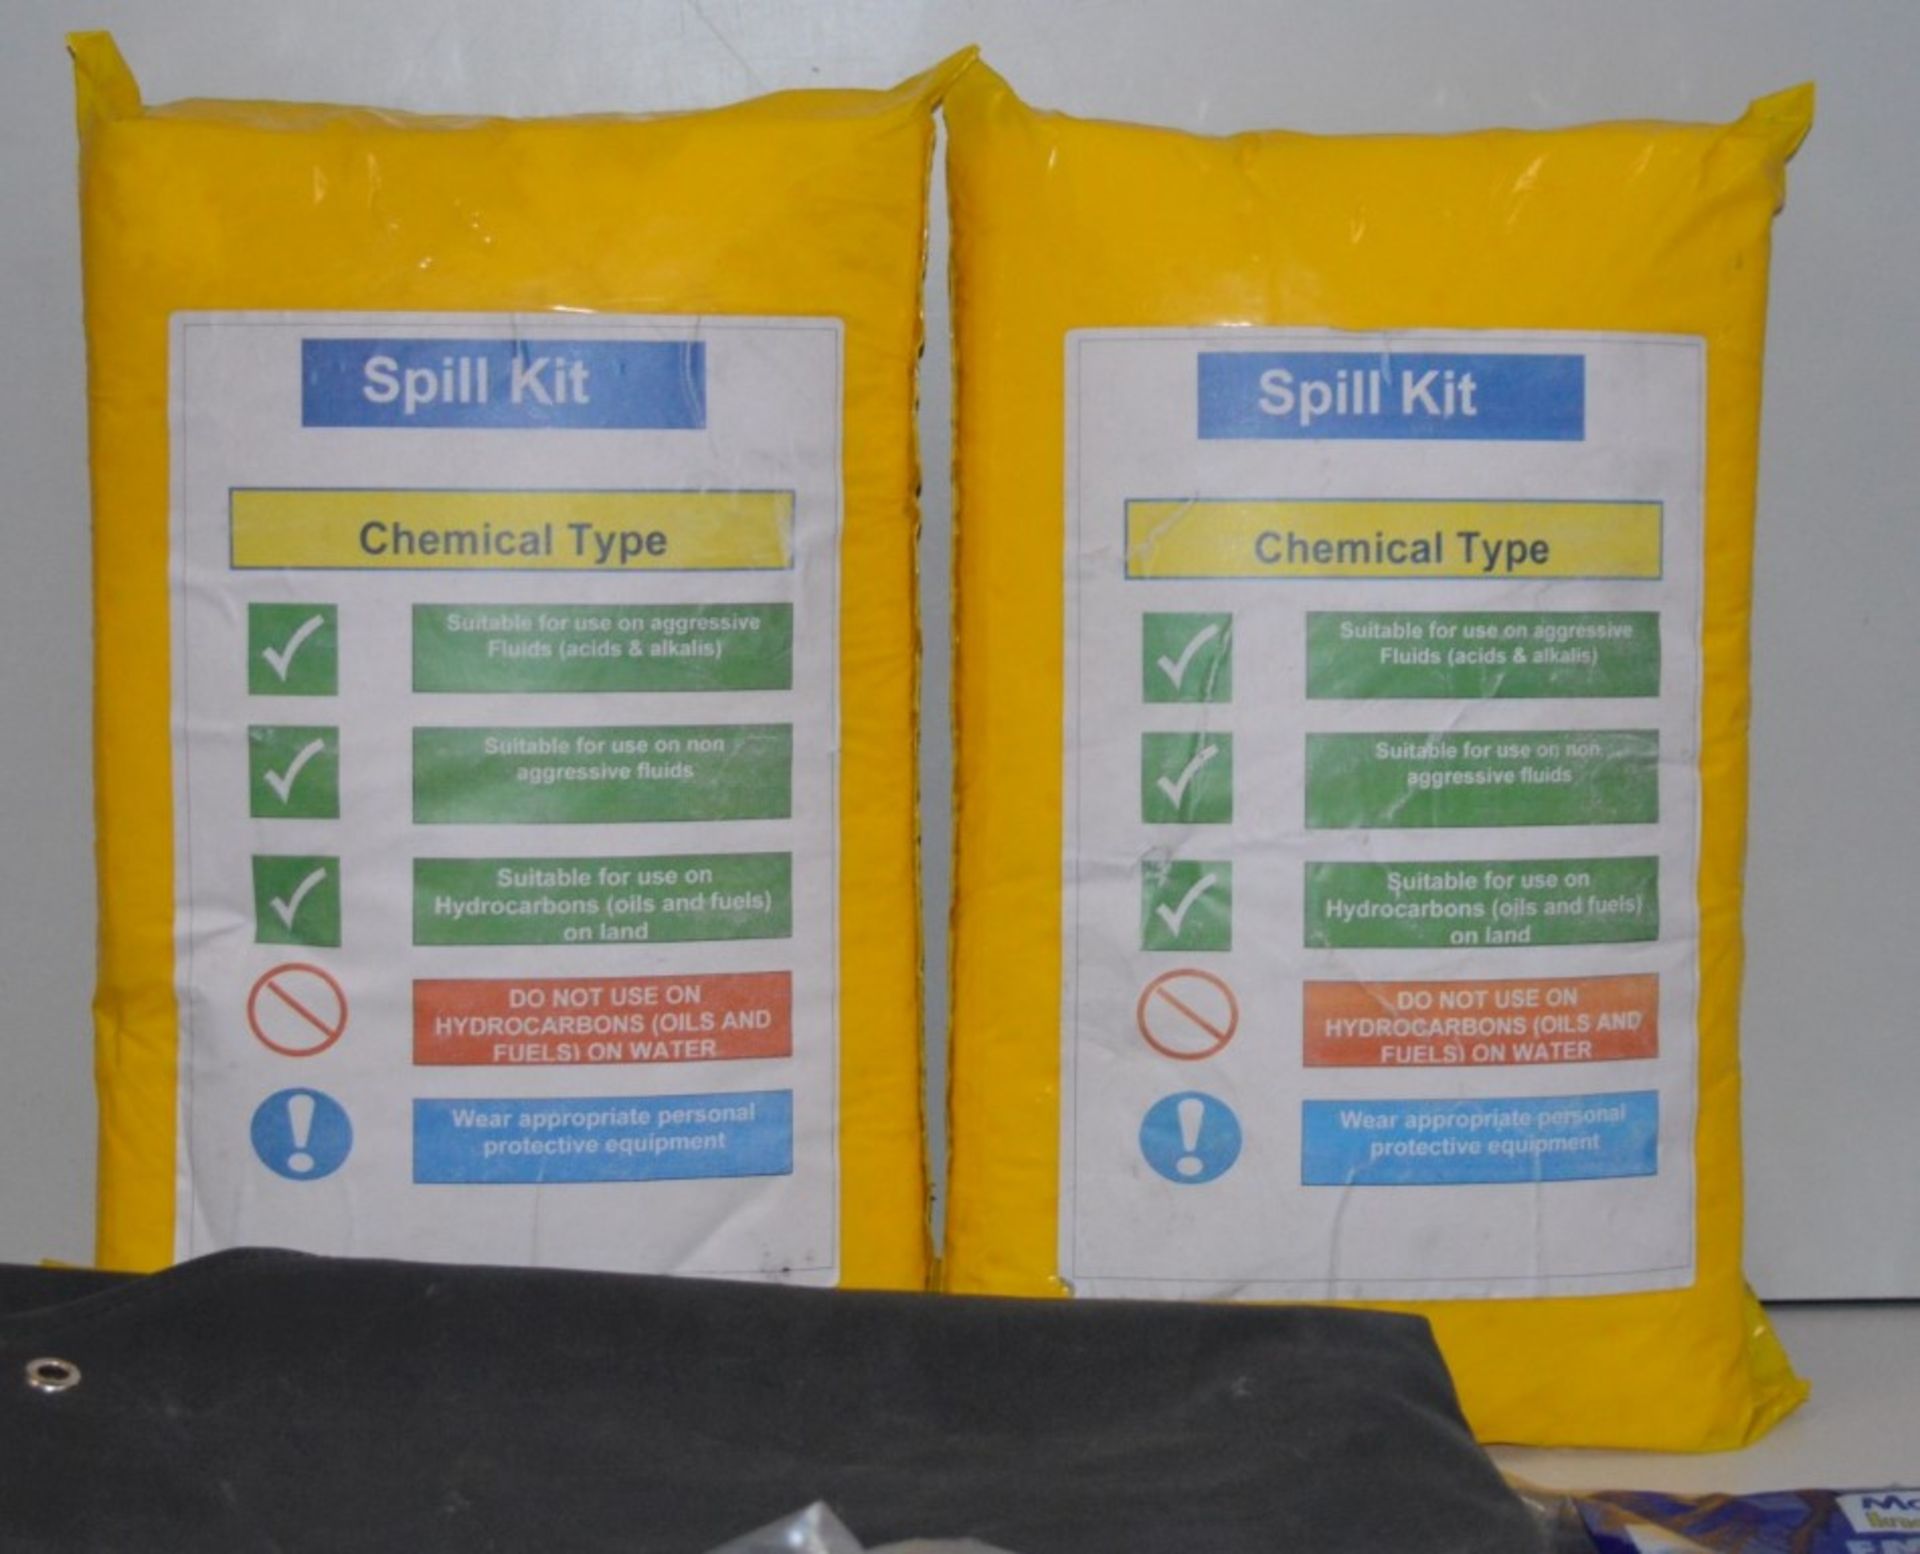 1 x Assorted Collection of Spill Kit Consumables - Includes 2 x Chemical Spill Kits, 1 x Emeror - Image 10 of 16